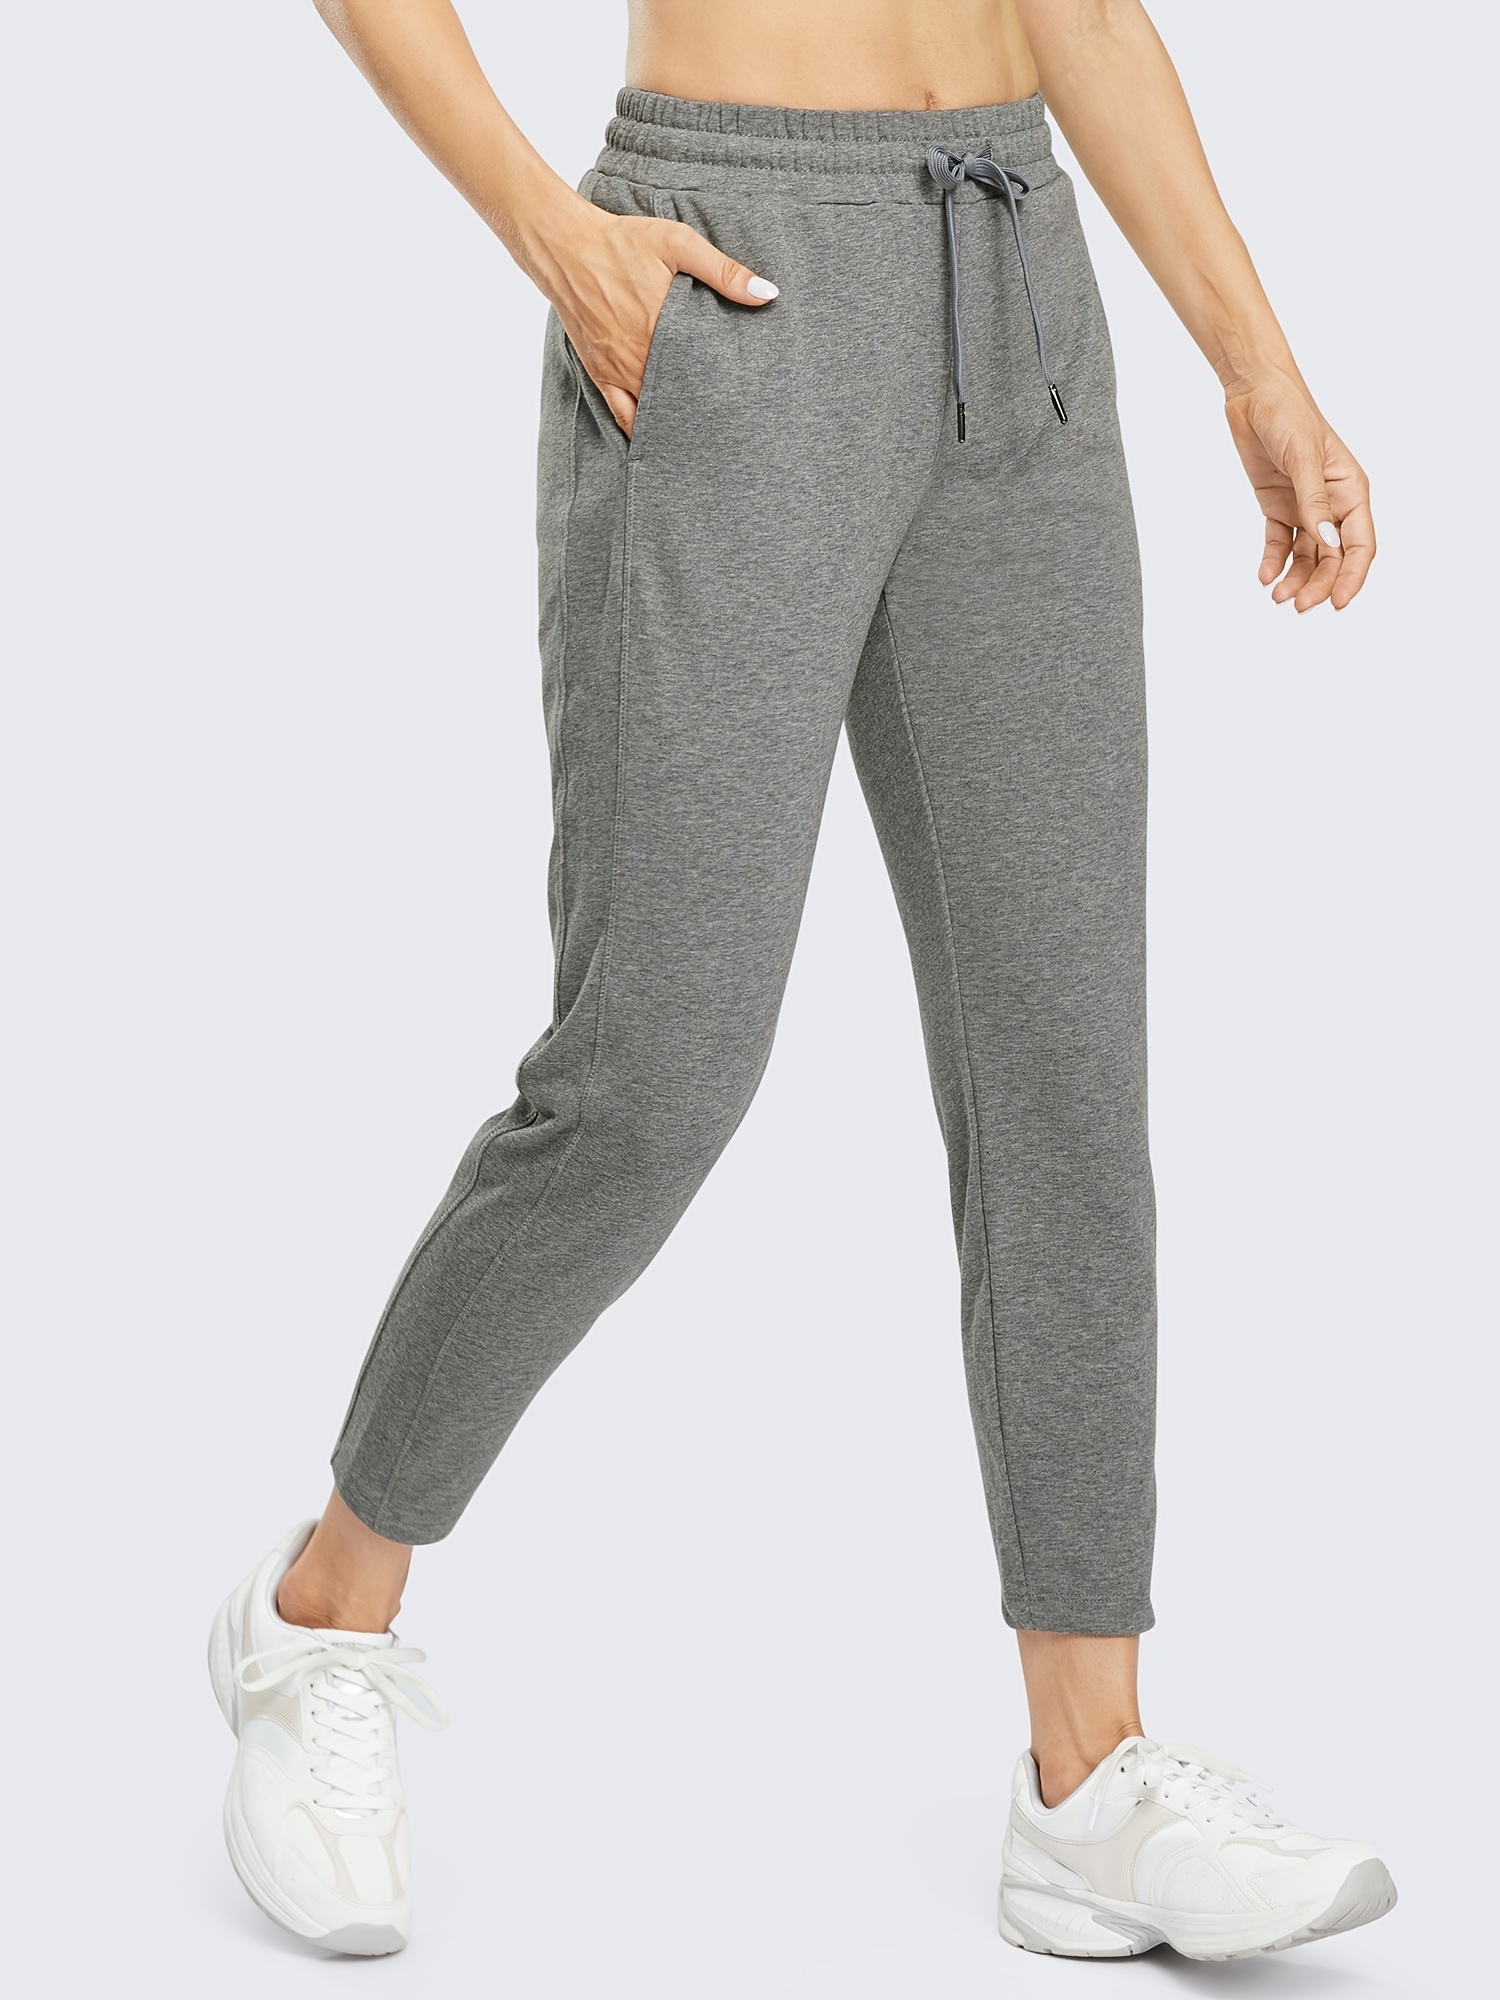 Women's High Waisted Joggers with Pockets Running Sweatpants Yoga Workout  Athletic Tapered Lounge Pants 28